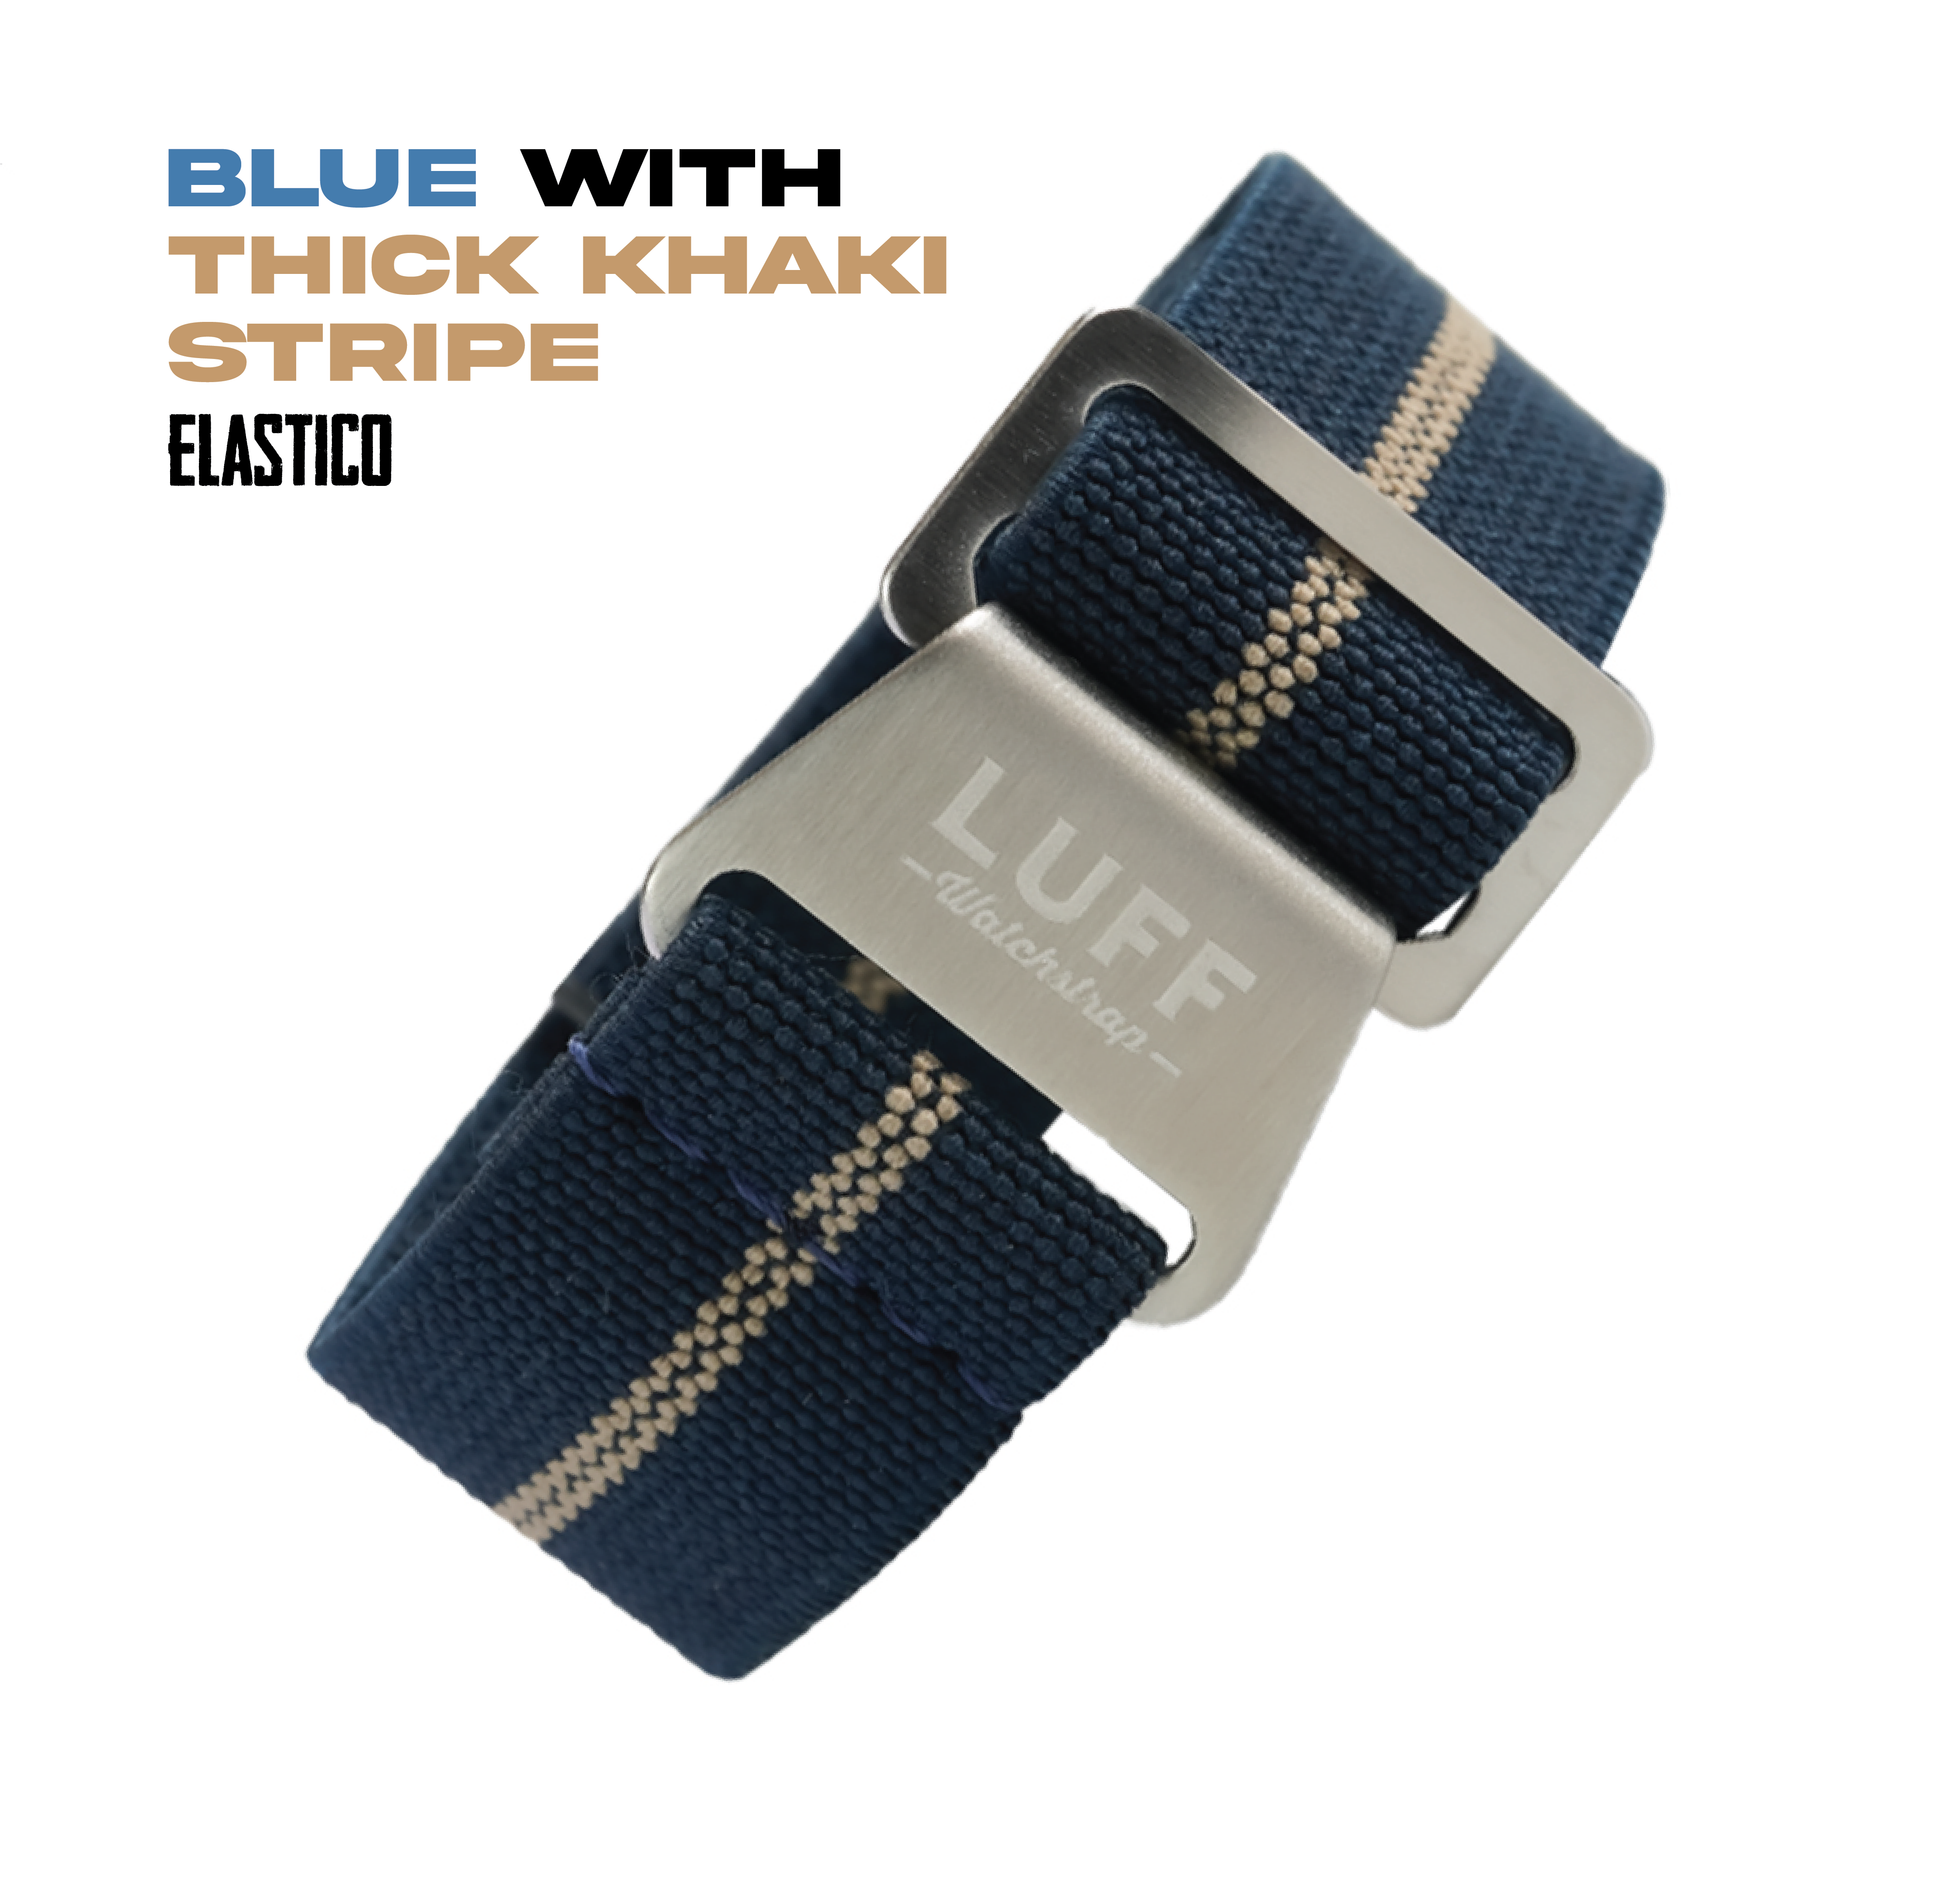 Blue with Thick Khaki (6900577894487)